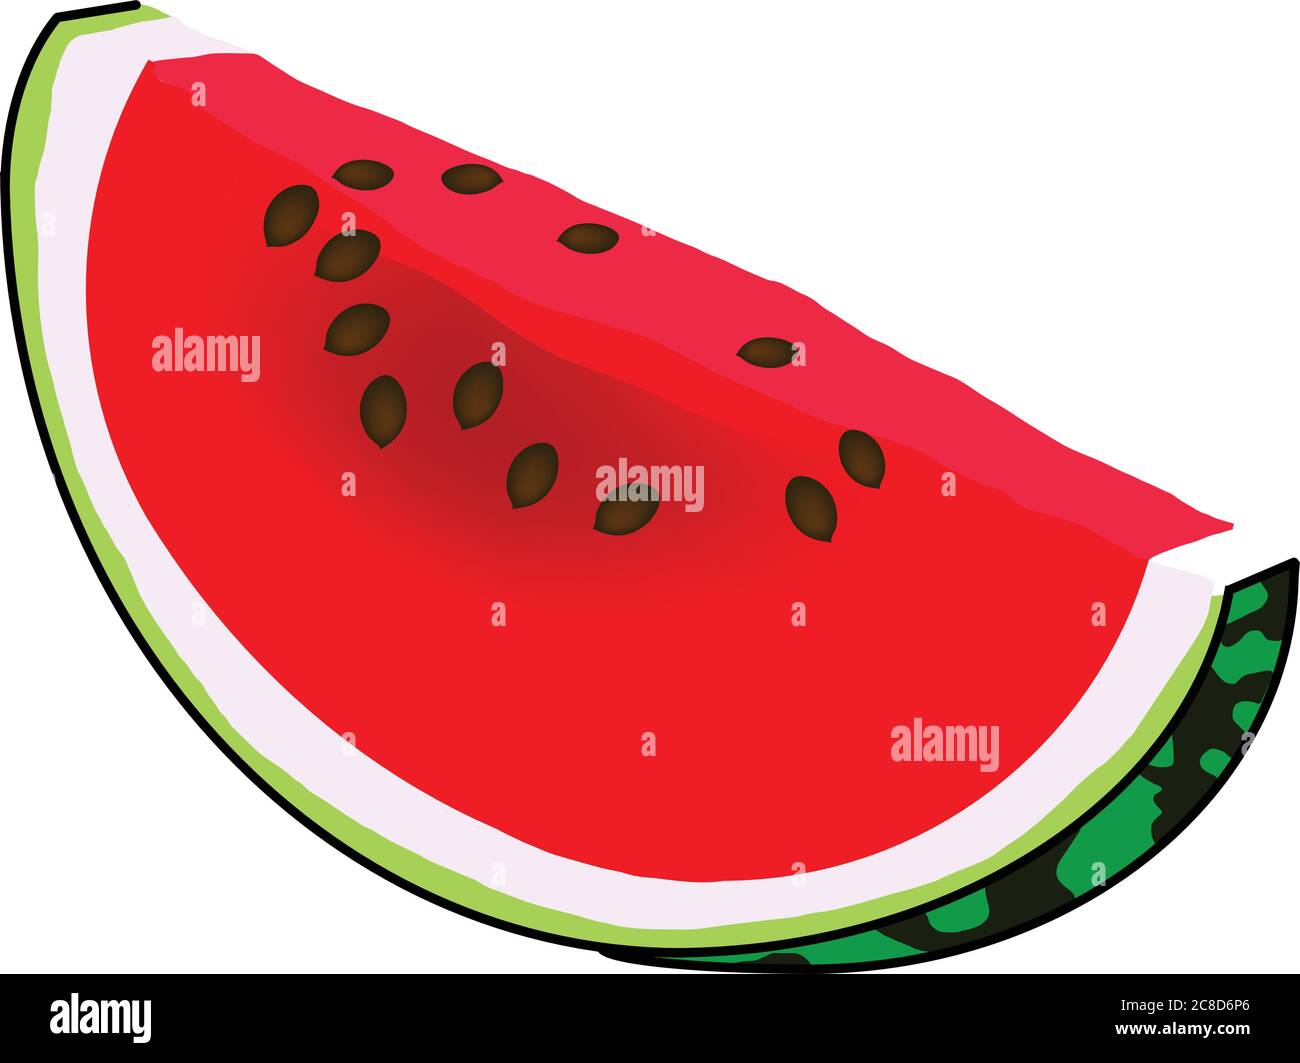 Watermelon seeds Stock Vector Images - Alamy